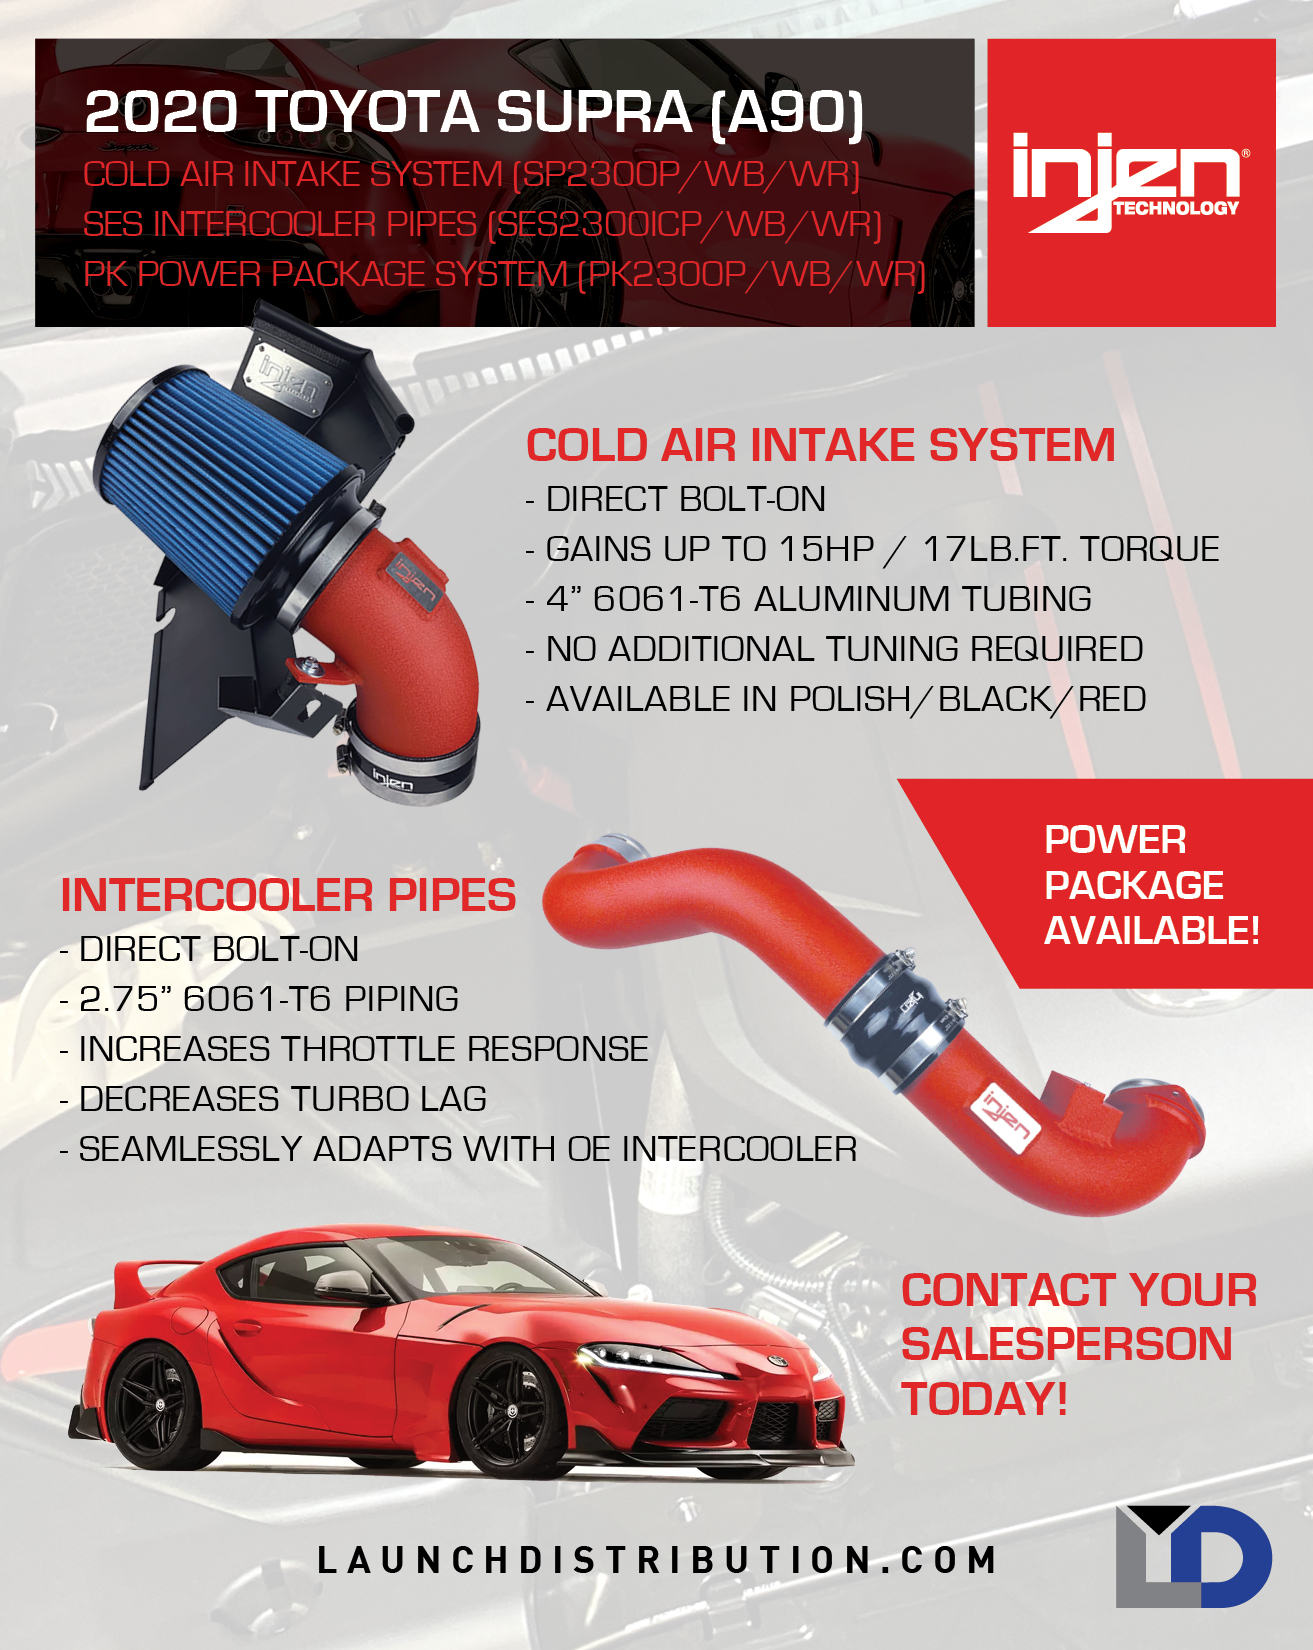 NOW HERE – Injen Technology Cold Air Kit and Intercooler Piping for the 2020 Toyota Supra A90